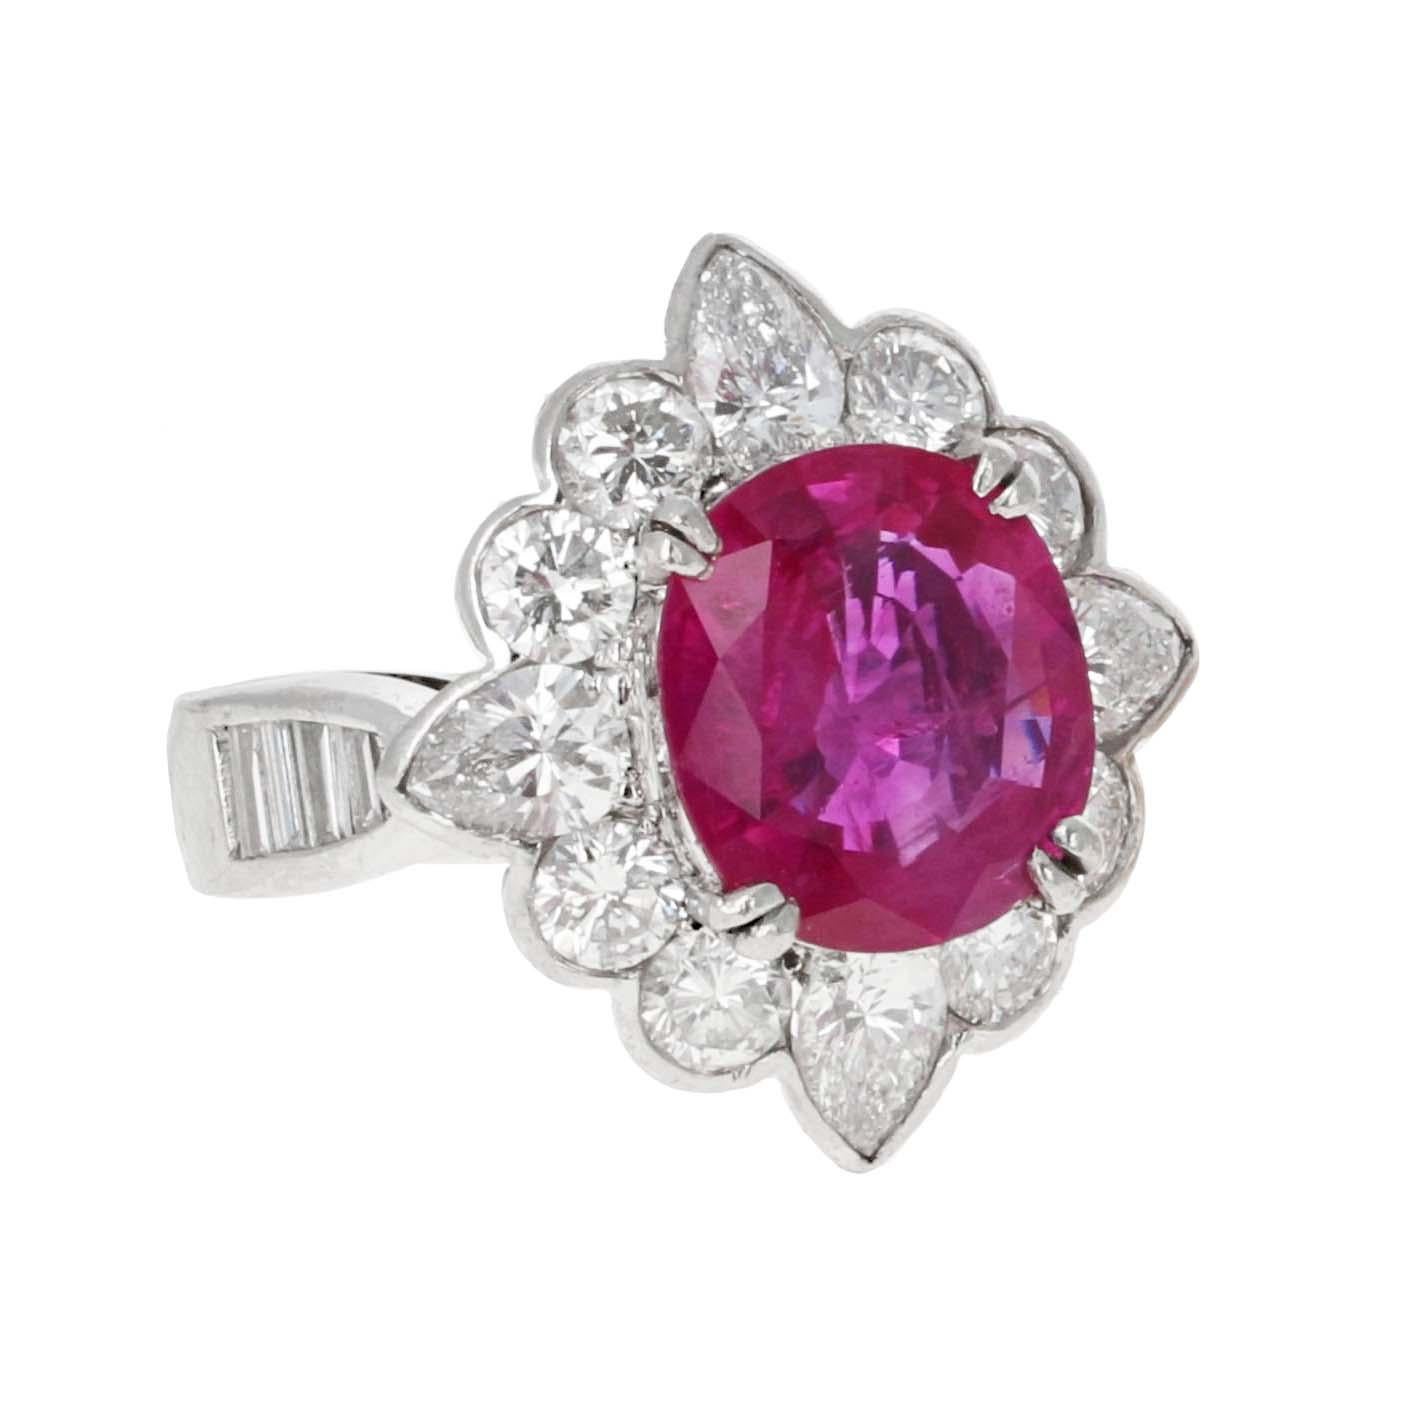 GIA-certified 3.71-carat Burma heated ruby and diamond cocktail ring. The Burma ruby is an oval cut Purplish Red color measuring 10.57 x 9.40 x  4.00mm. Elegantly set in platinum the ruby is accented with a 2.28 carat diamond halo. The mesmerizing